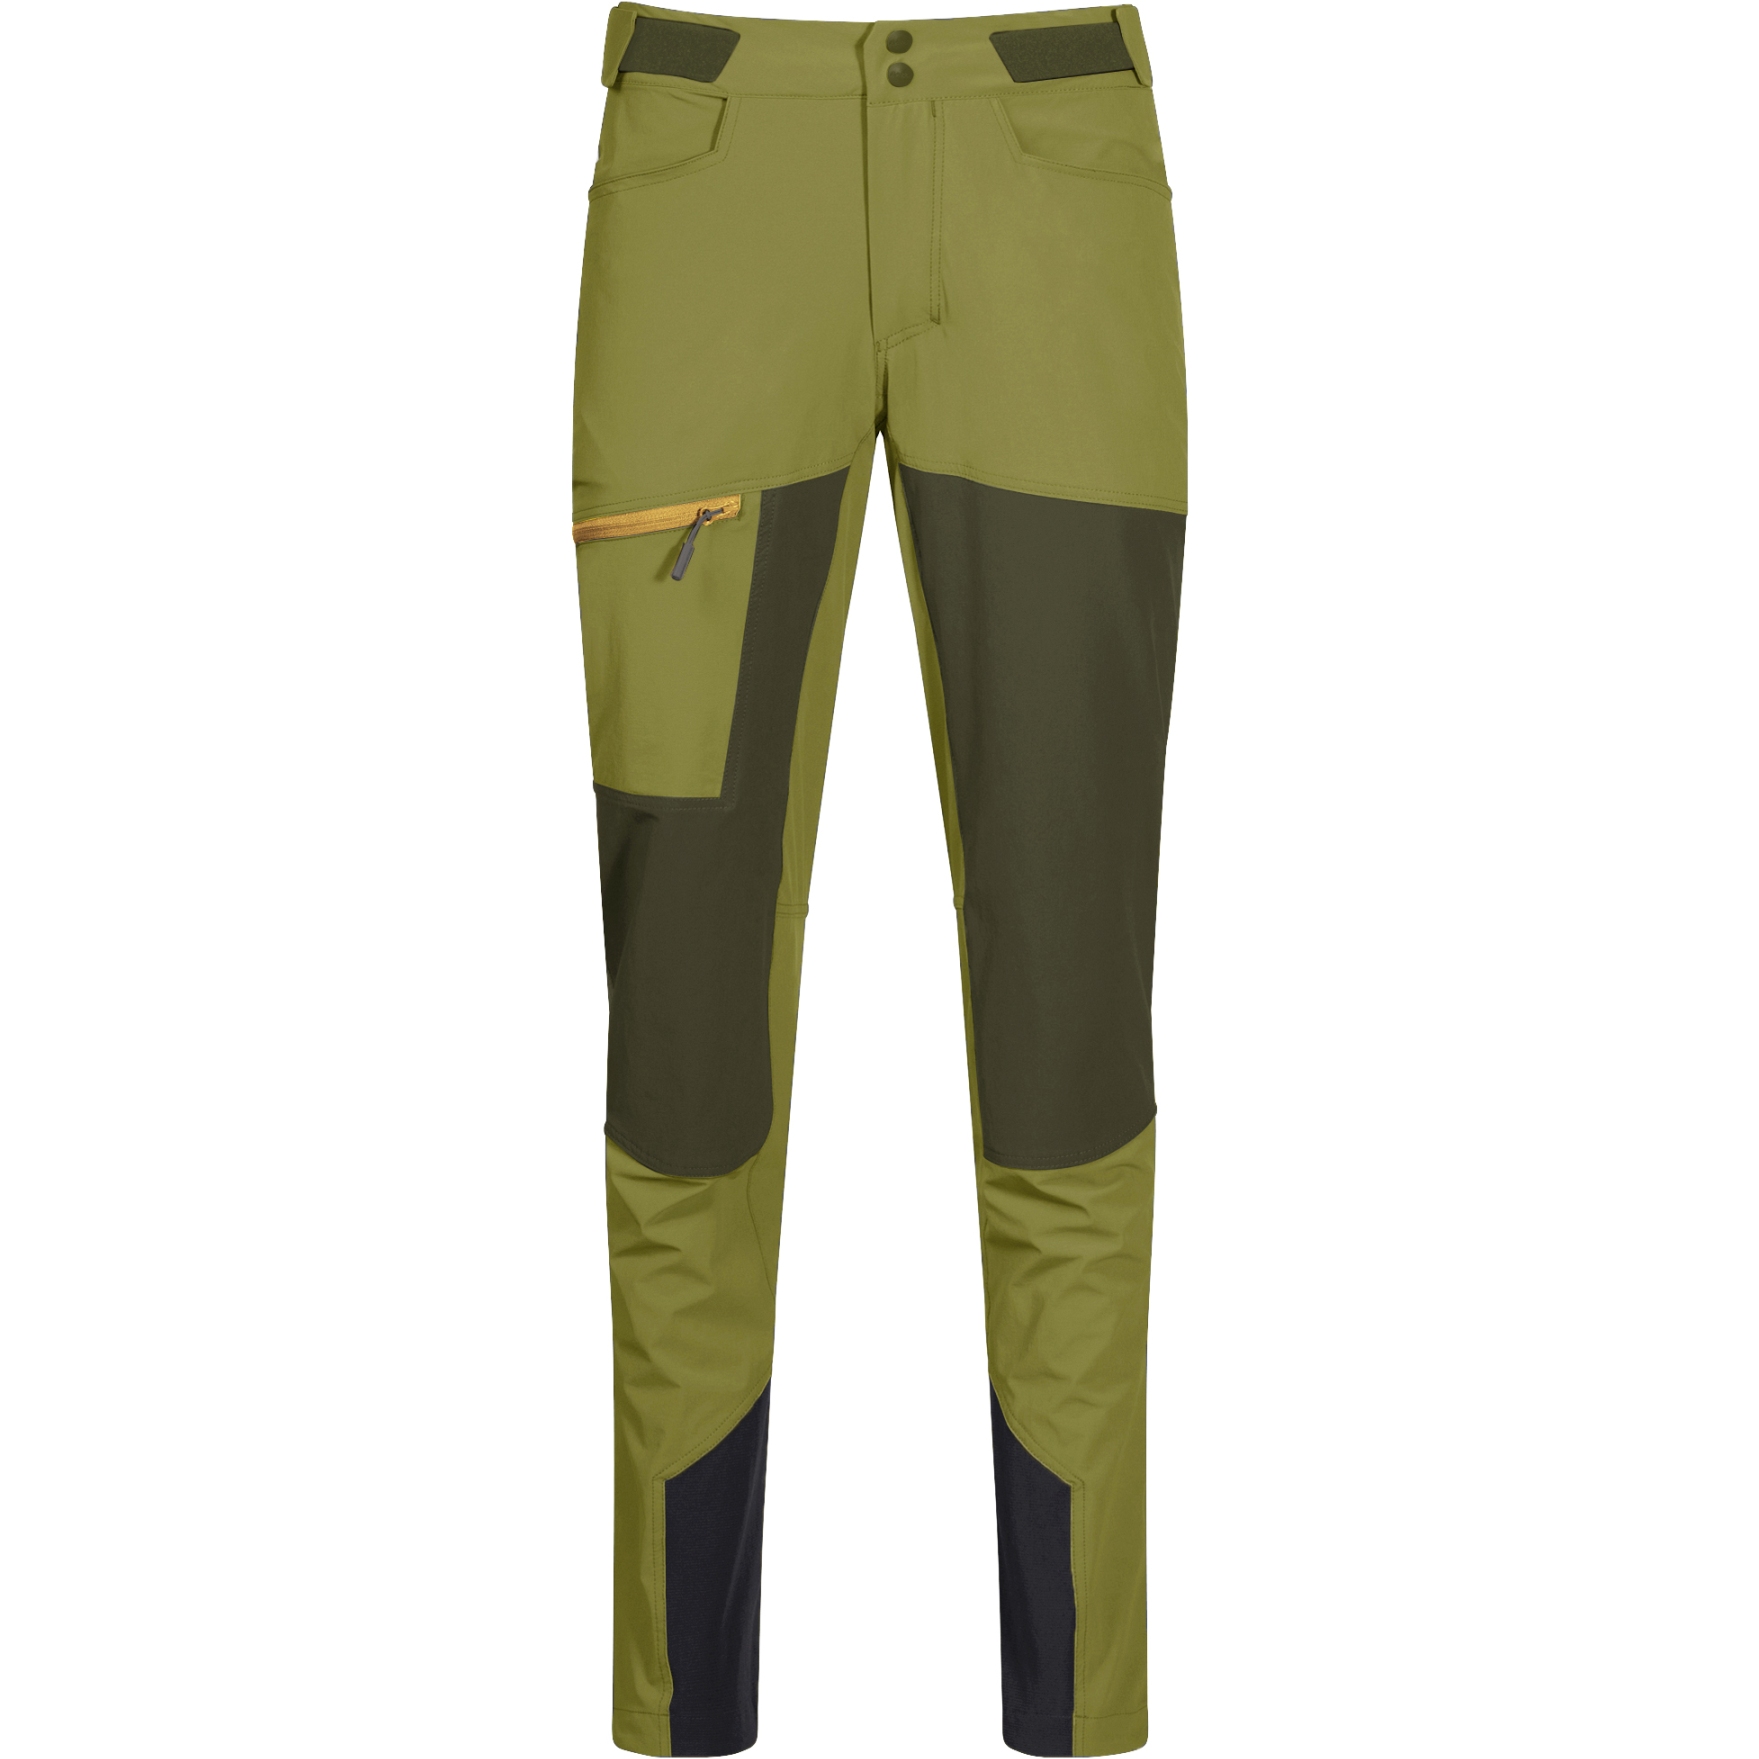 Image of Bergans Cecilie Mountain Softshell Women's Pants - trail green/dark olive green